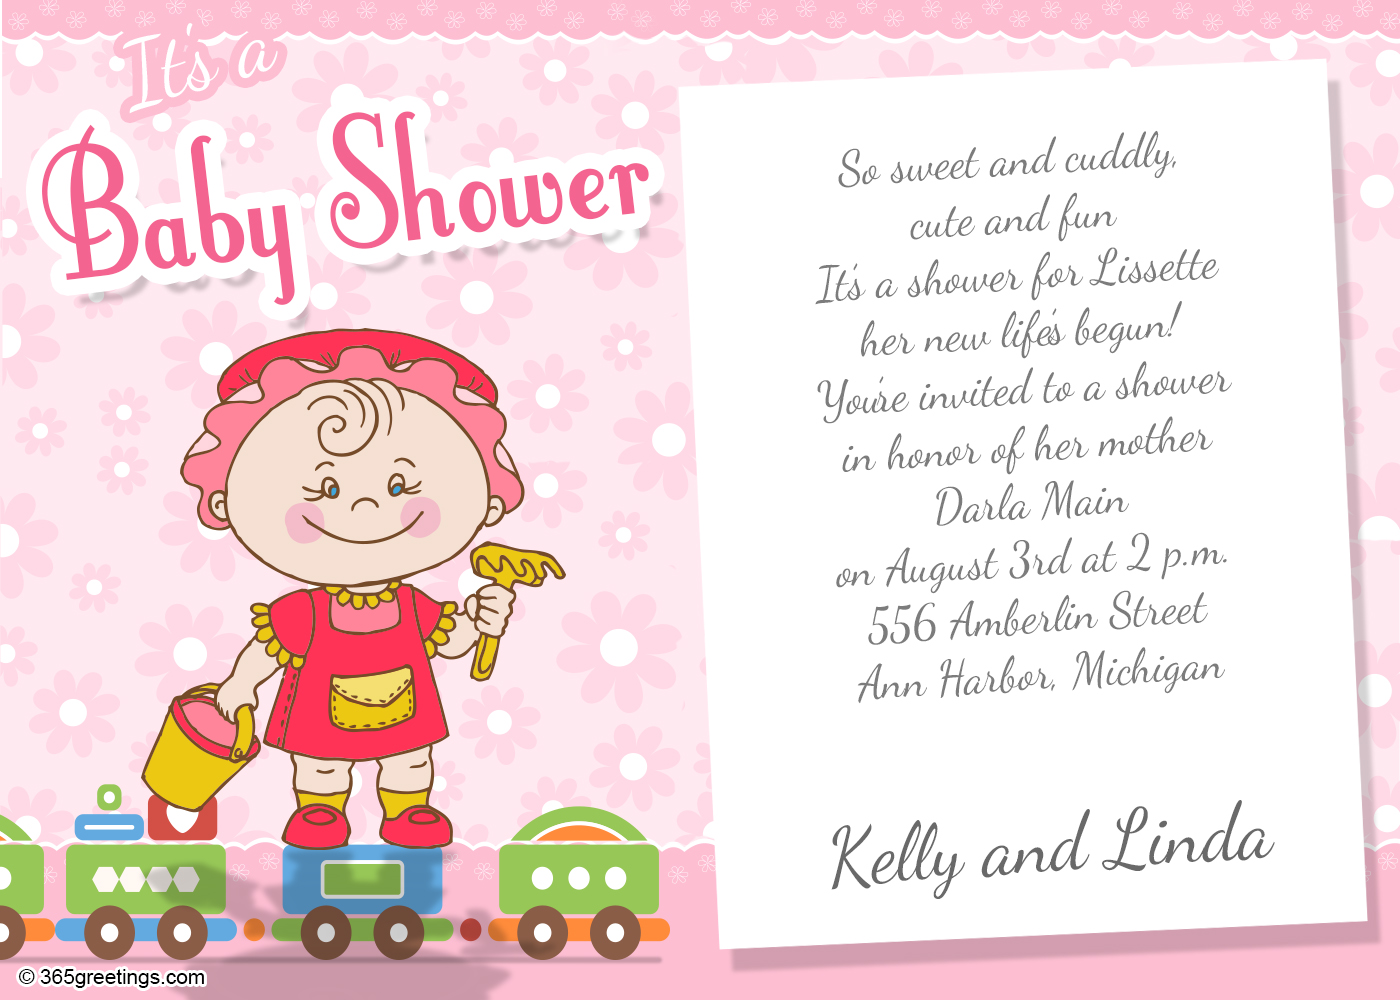 Full Size of Baby Shower:delightful Baby Shower Invitation Wording Picture Designs Baby Shower Outfit Guest Baby Shower Word Search Baby Shower Halls Baby Shower Hostess Gifts Baby Favors